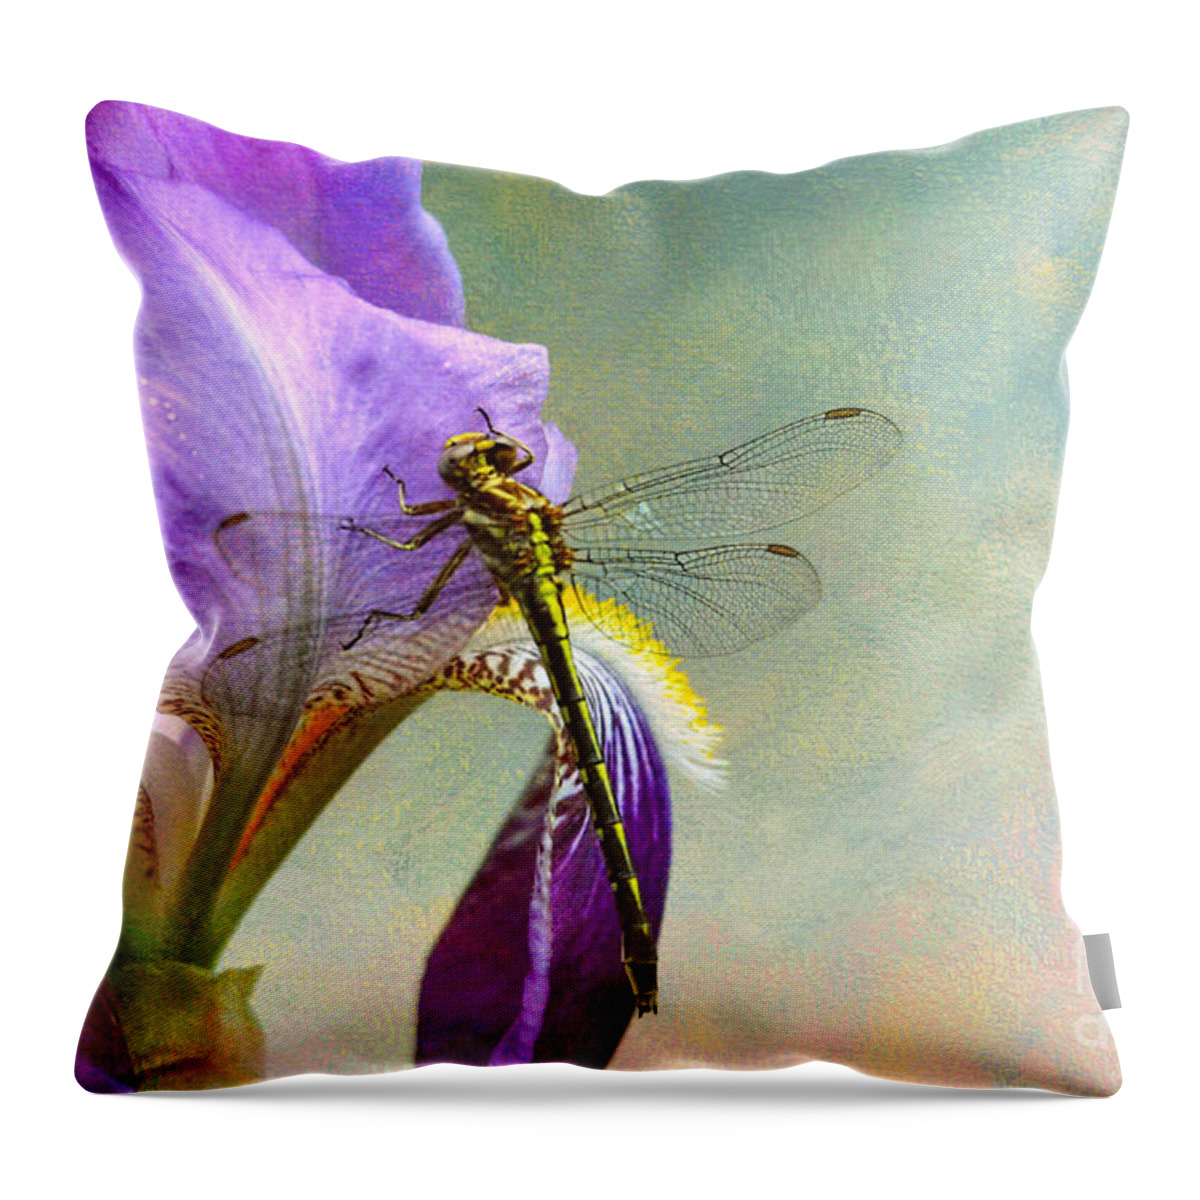 Iris Germanica Throw Pillow featuring the photograph Say Hello To Spring by Jai Johnson